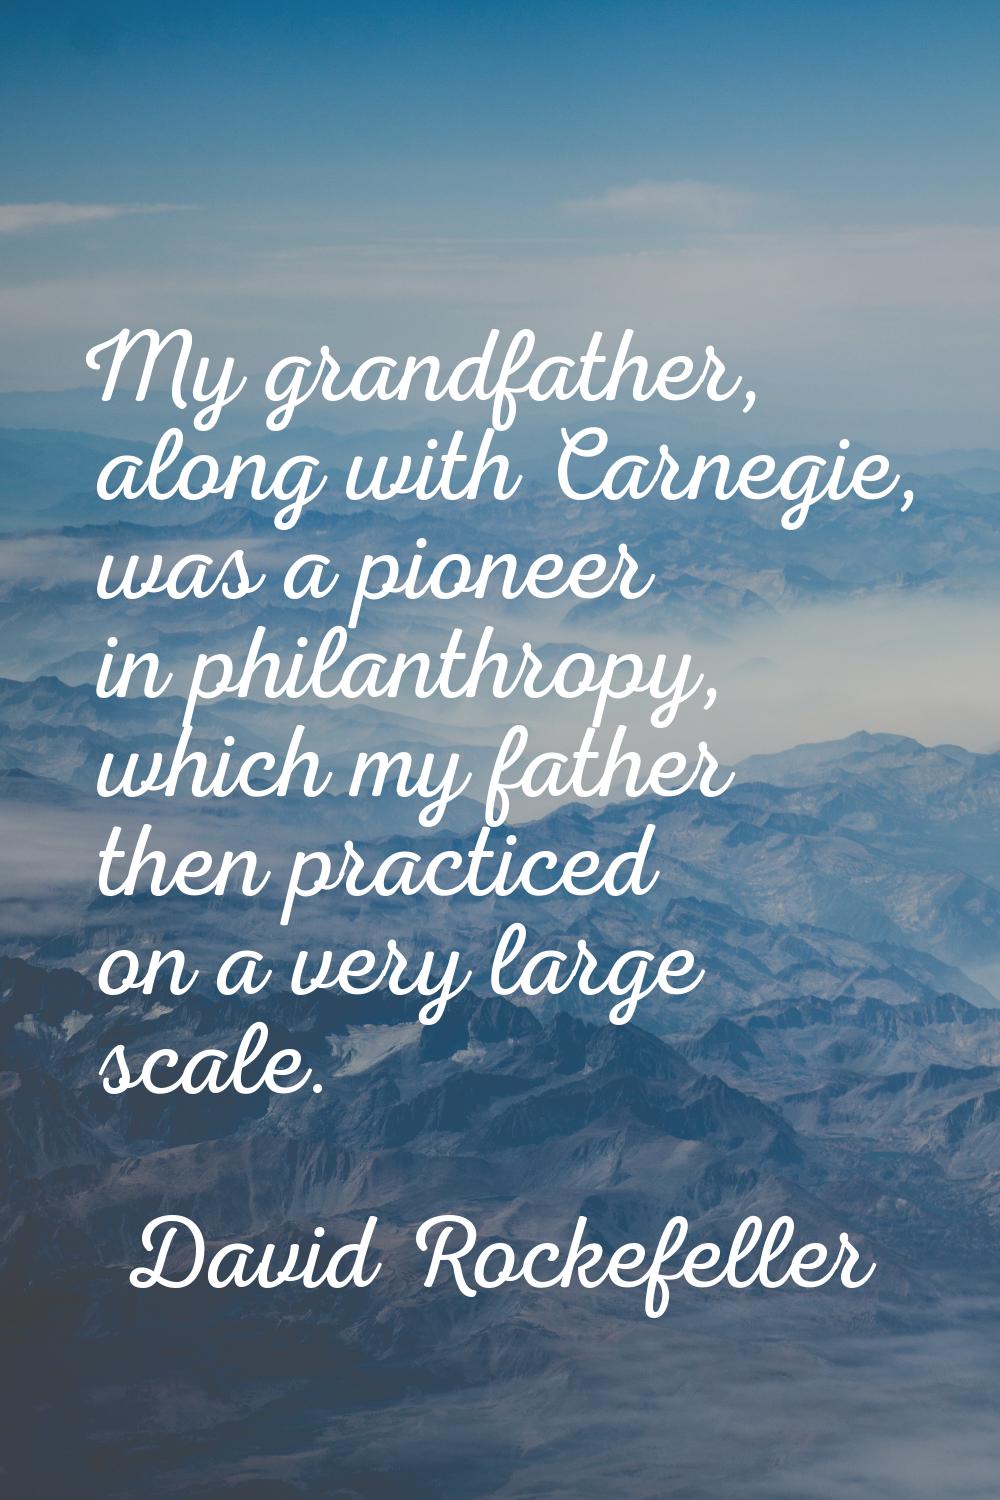 My grandfather, along with Carnegie, was a pioneer in philanthropy, which my father then practiced 